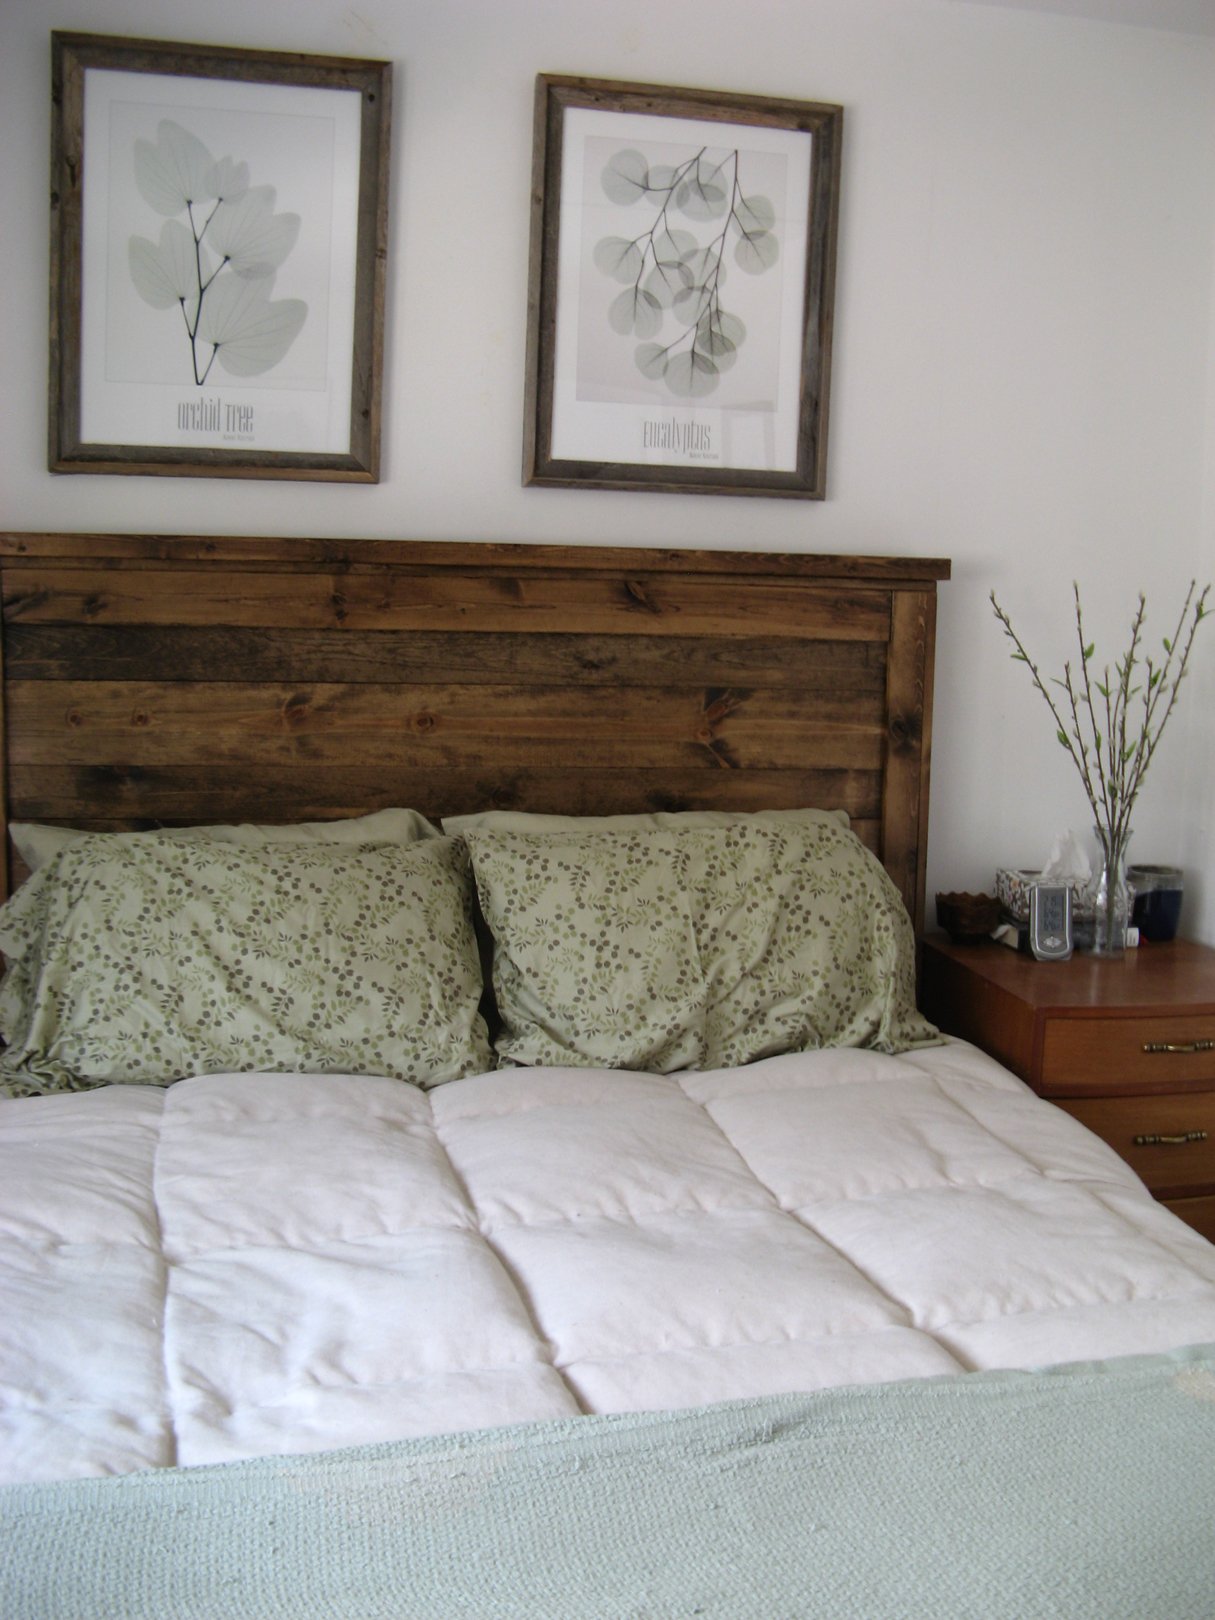 Yourself Do wood First    out  wood reclaimed It used of look  Project diy Queen  headboard headboard!